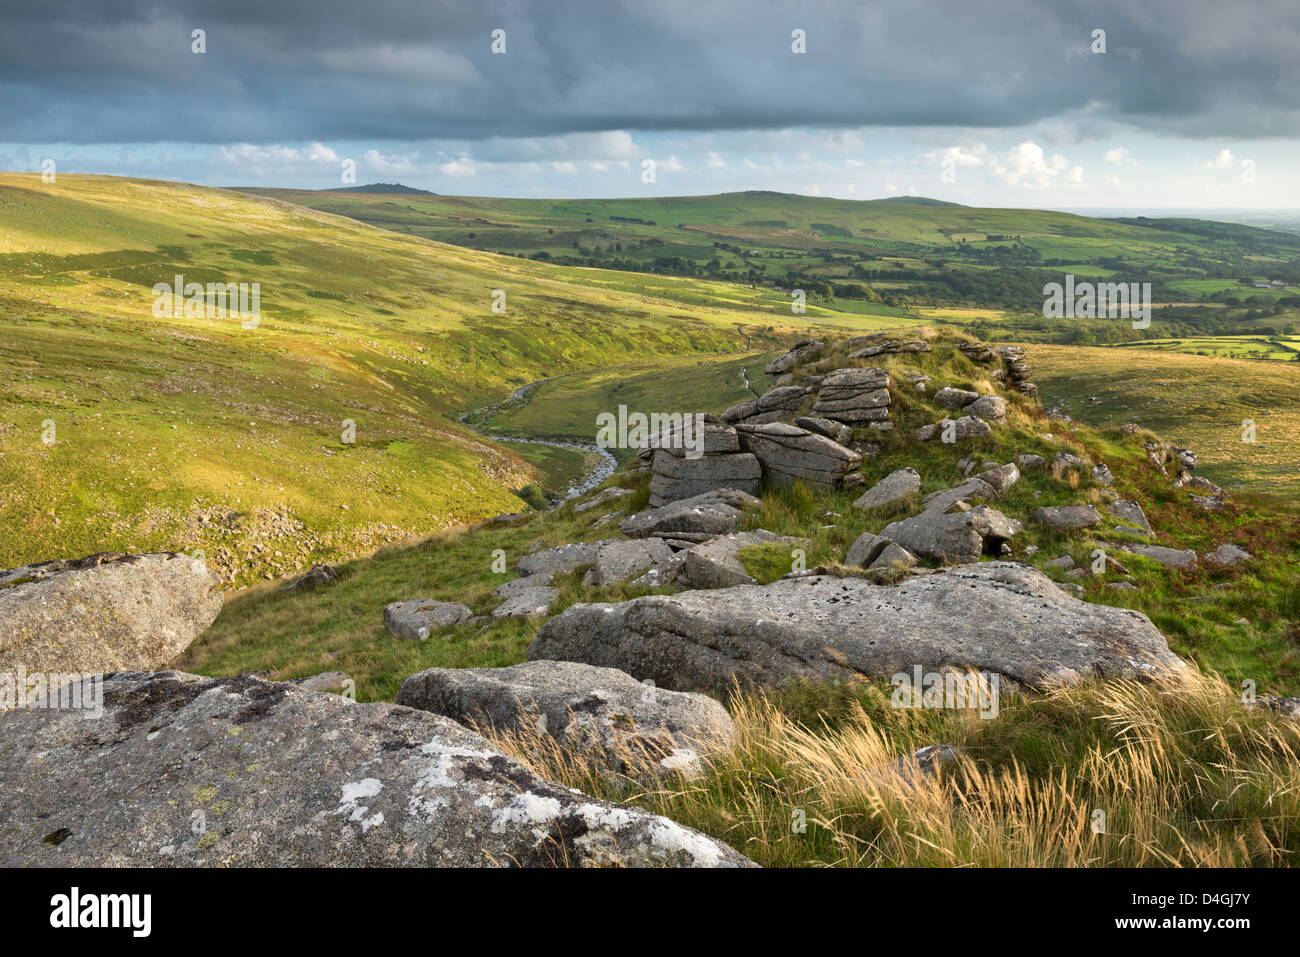 Tavy Cleave viewed from Ger Tor, Dartmoor, Devon, England. Summer (August) 2012 Stock Photo